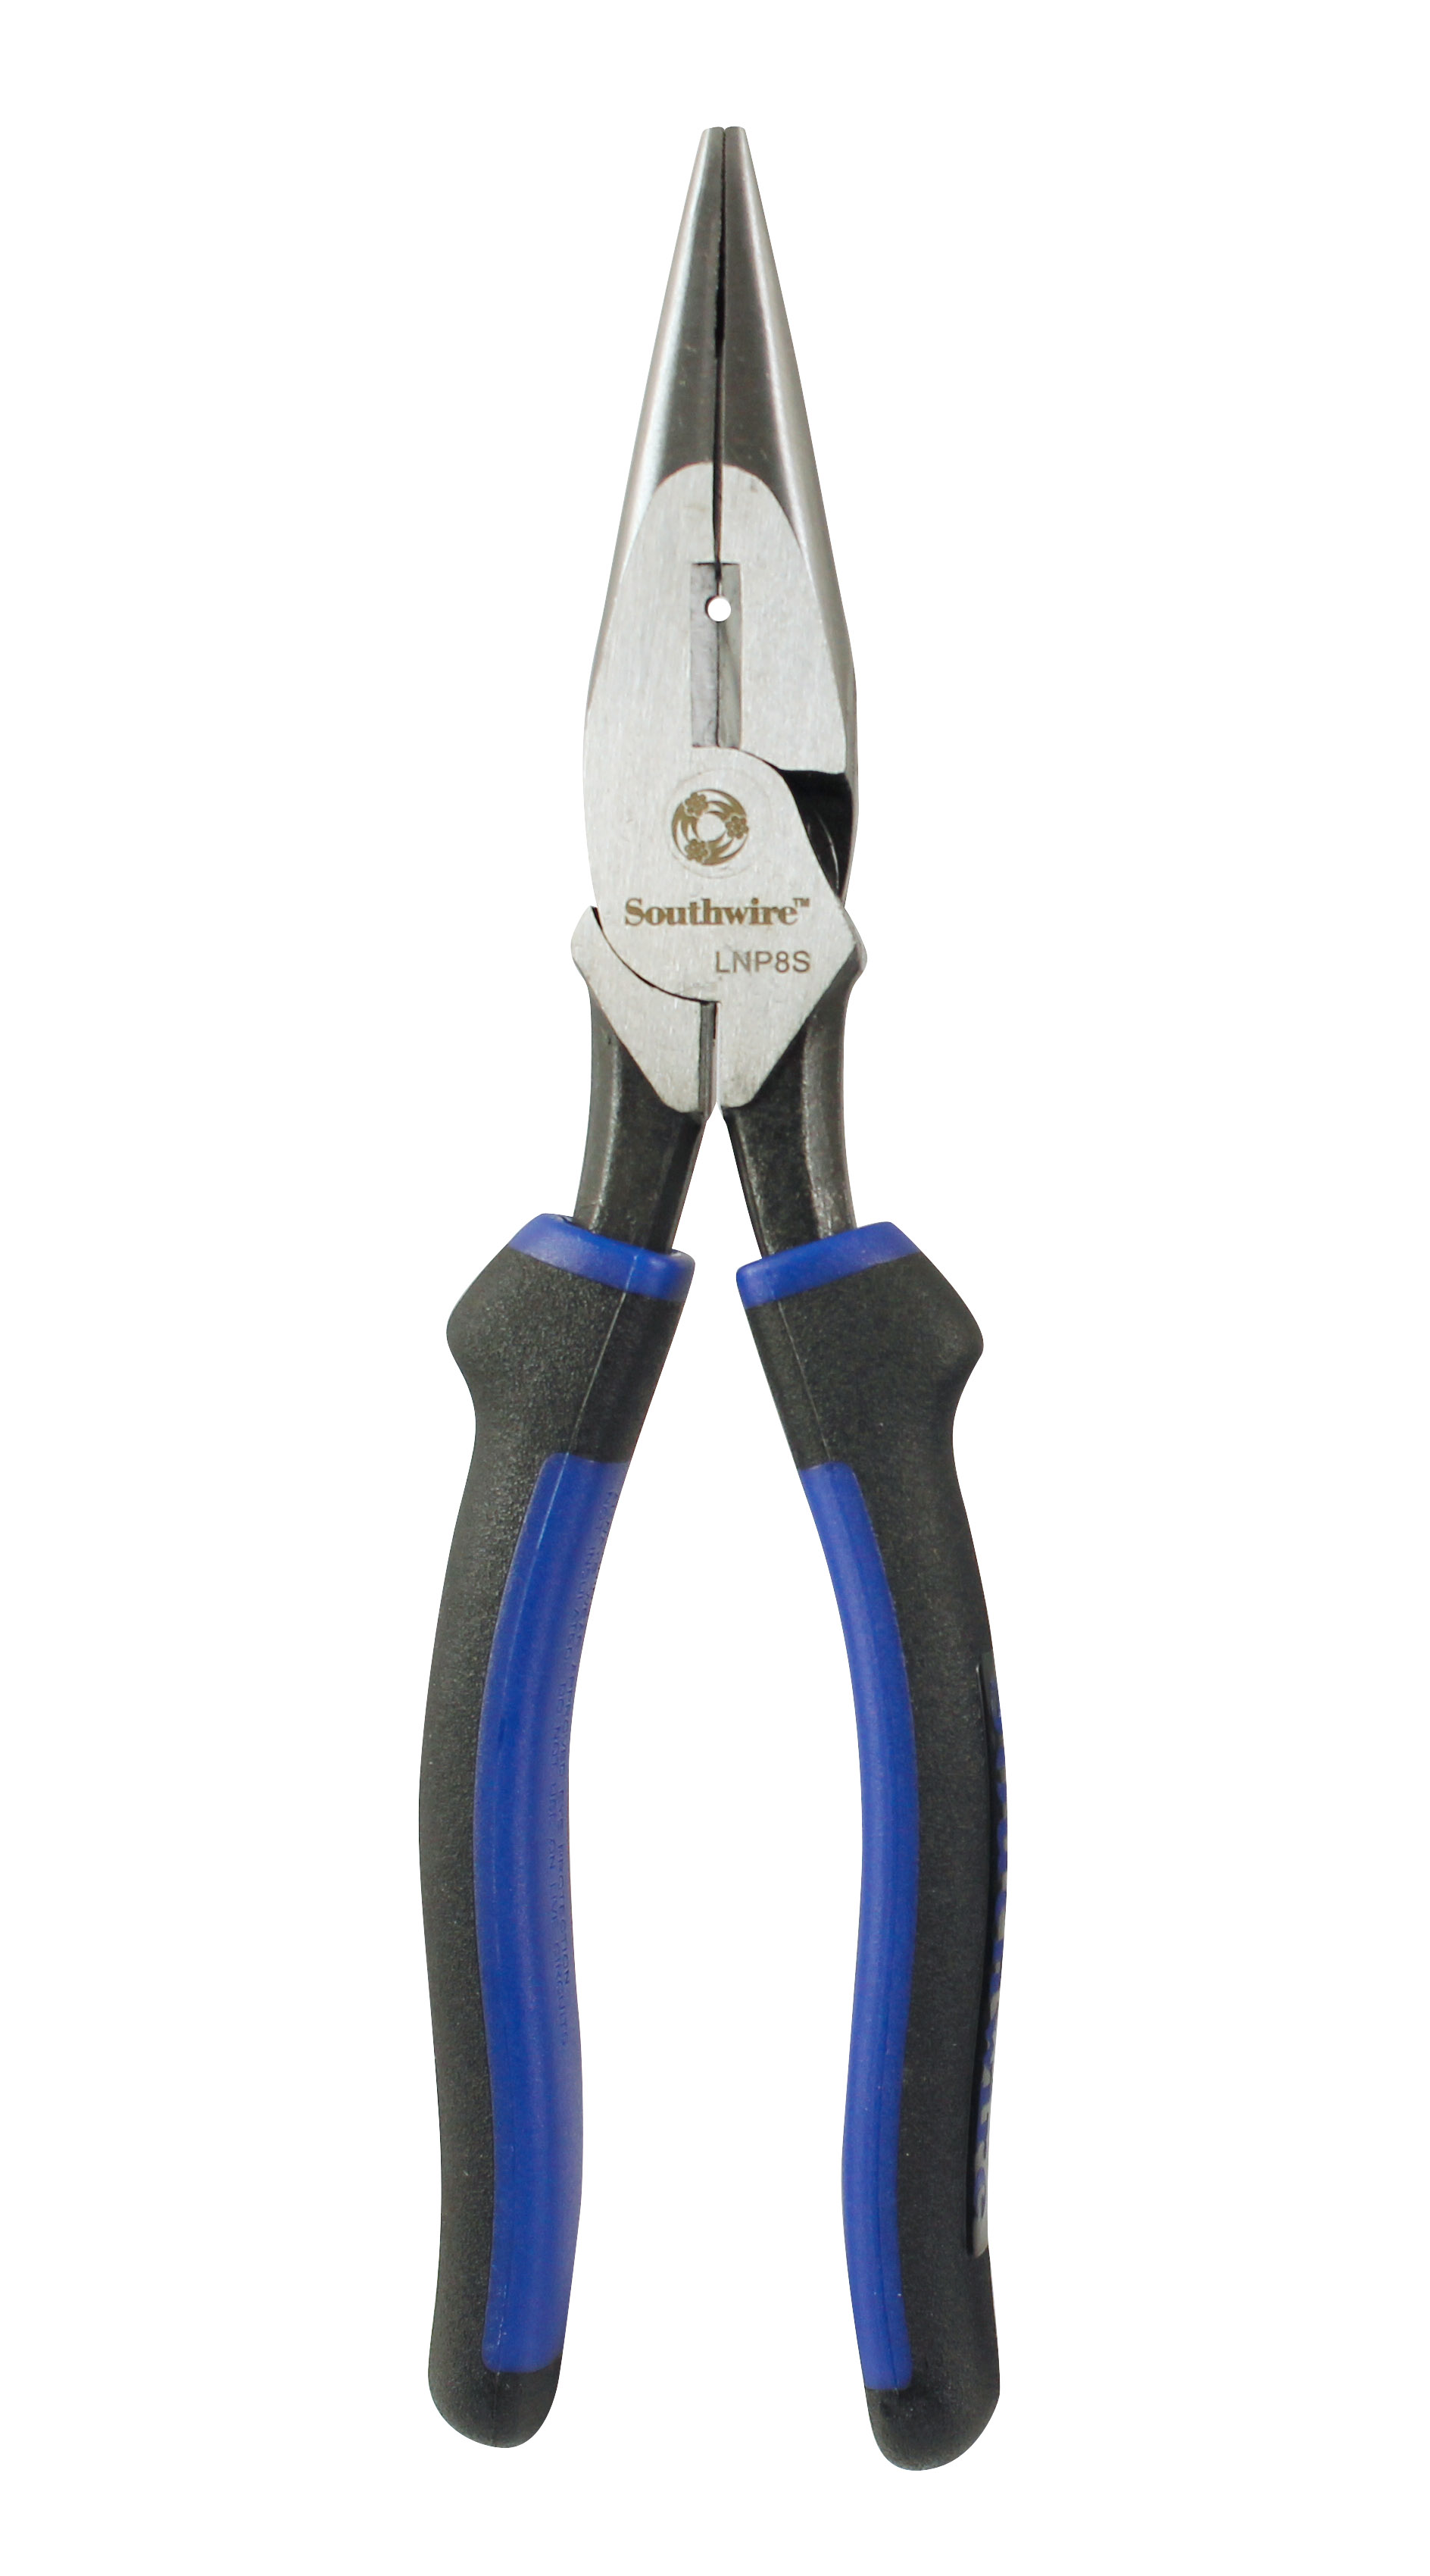 LNP8S 032886944116 The LNP8S is a durable, high-performing long nose pliers are built from forged steel and are fitted with dual material double-molded comfortable grips. Designed to reach tight spaces. The hi-leverage, hot-riveted joint is guaranteed to provide long-lasting durability and performance.